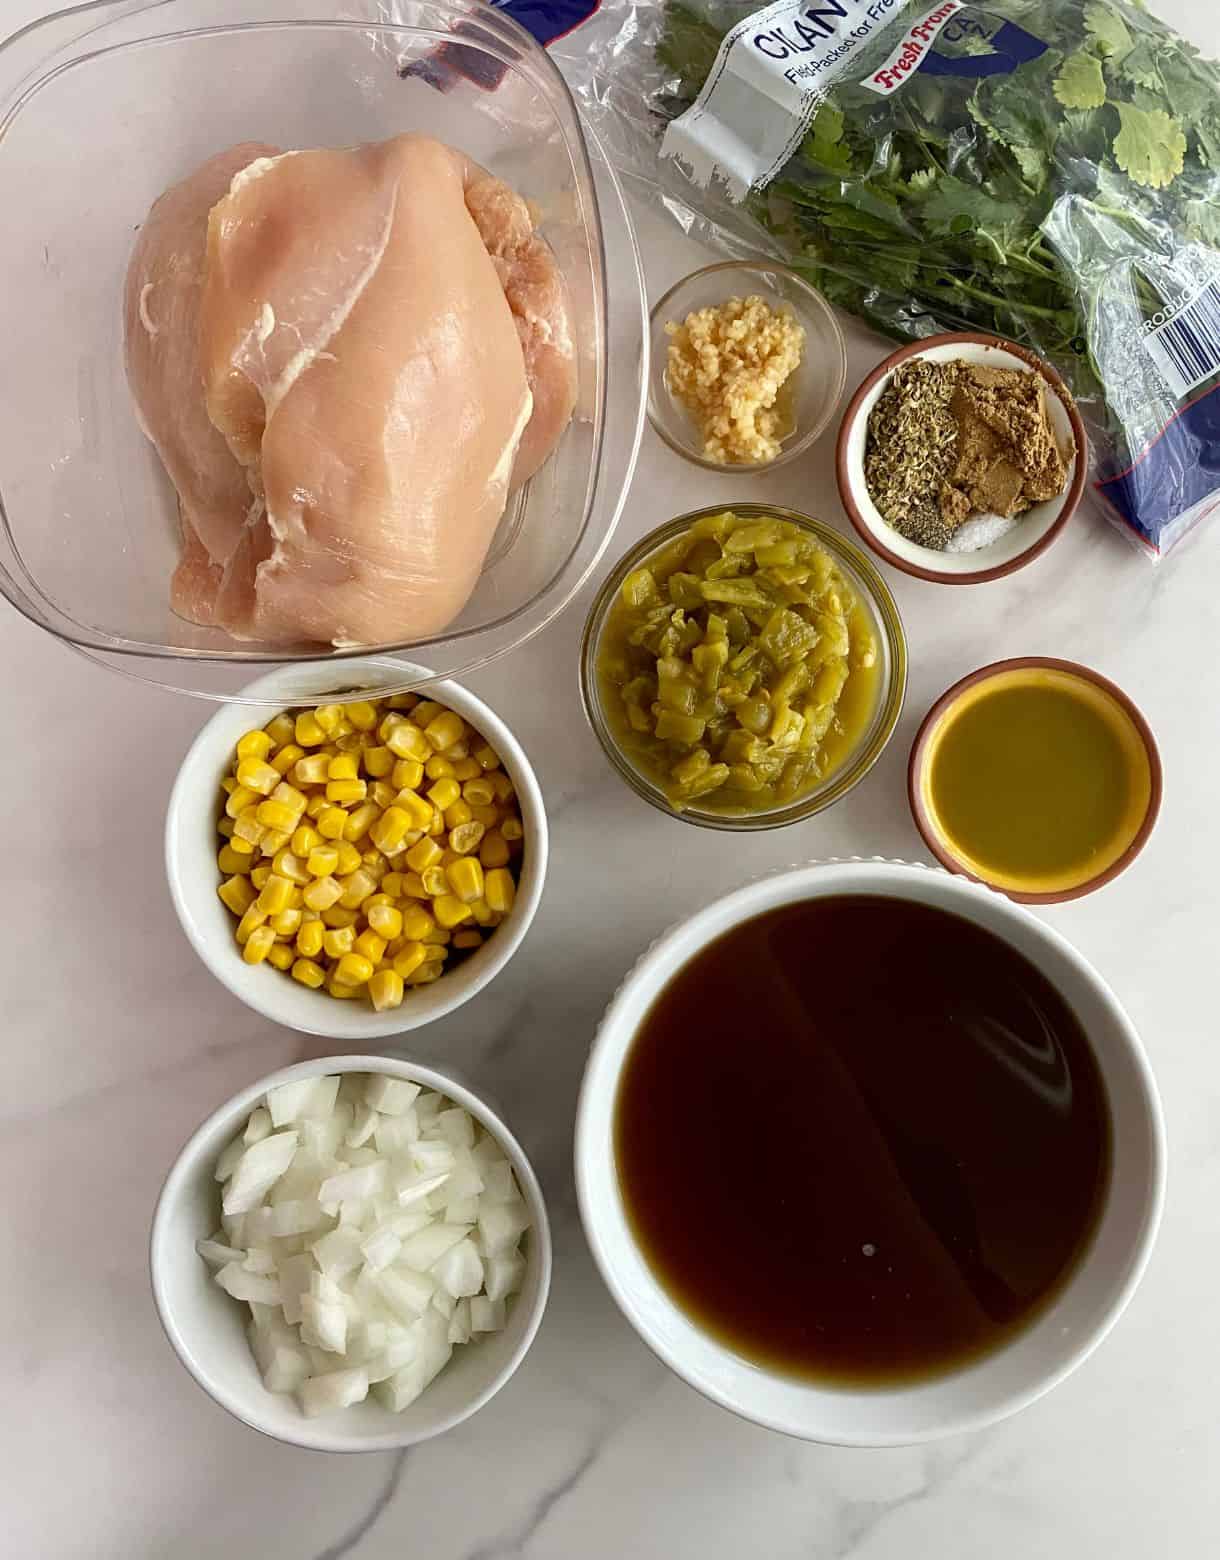 Ingredients for Green Chile Chicken Soup. Chicken breasts, chicken broth, corn, diced onion, diced green chiles, garlic, jalapeno hot sauce, salt, cumin, oregano, pepper and cilantro.